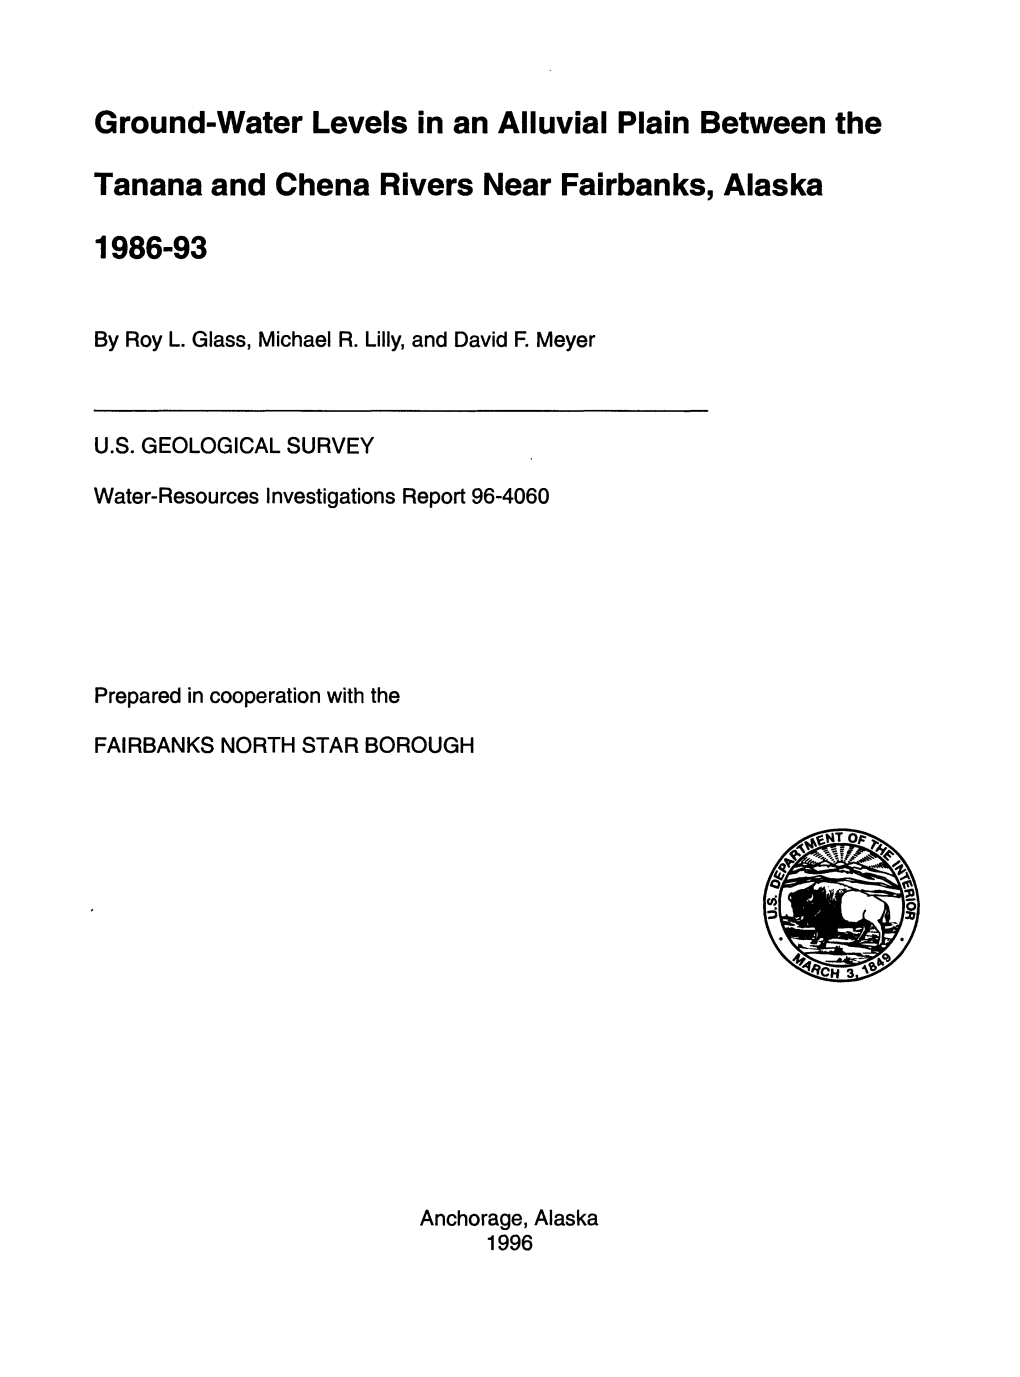 Ground-Water Levels in an Alluvial Plain Between the Tanana and Chena Rivers Near Fairbanks, Alaska 1986-93